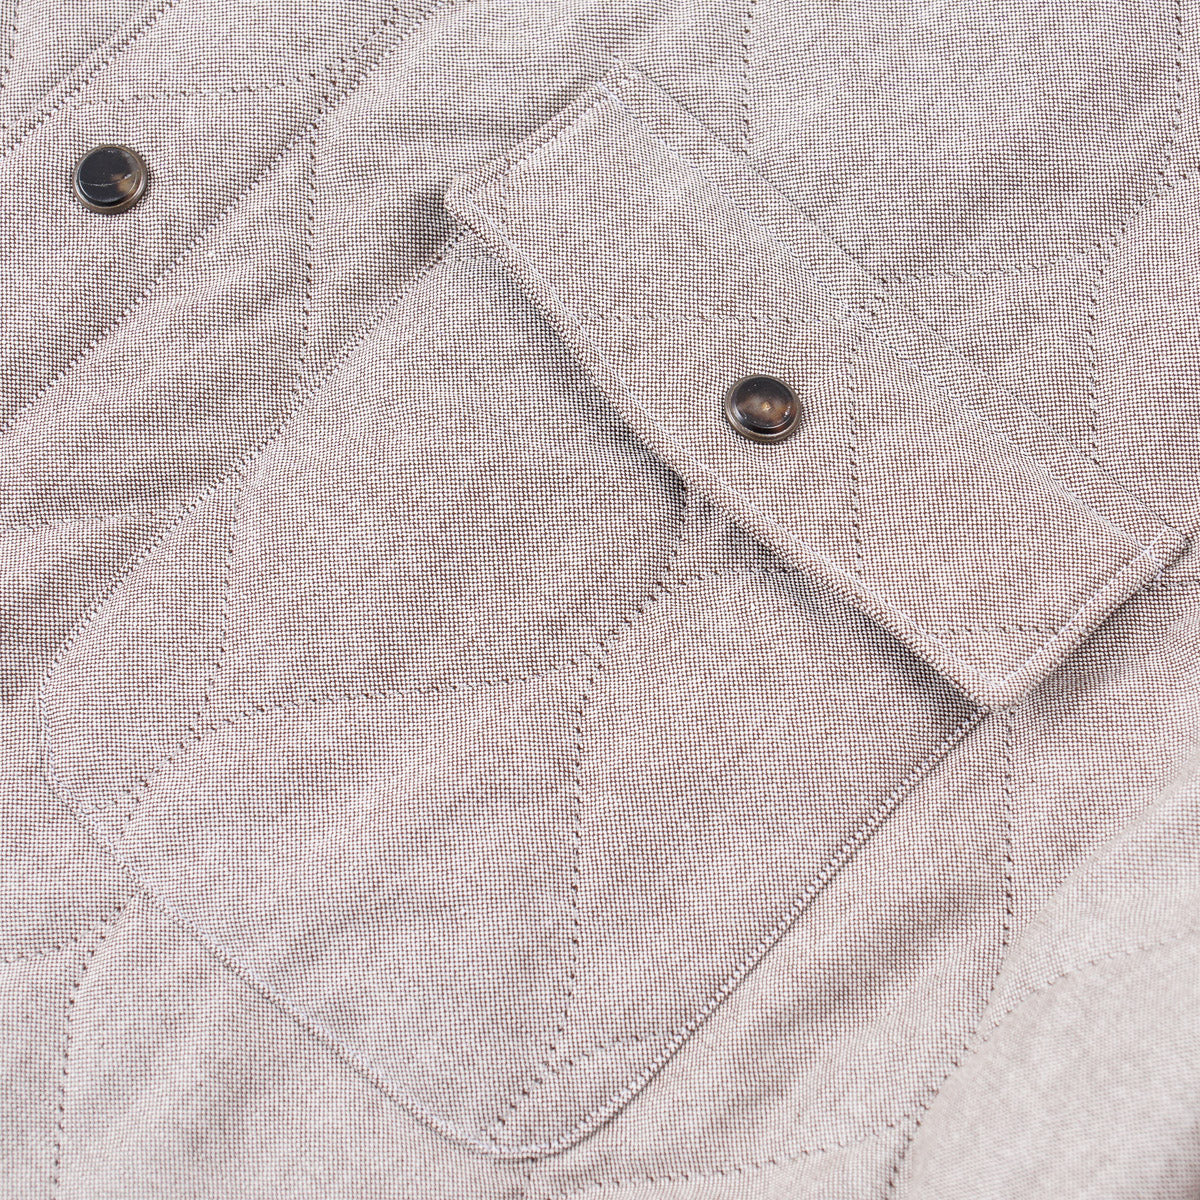 Finamore Quilted Cotton Shirt-Jacket - Top Shelf Apparel